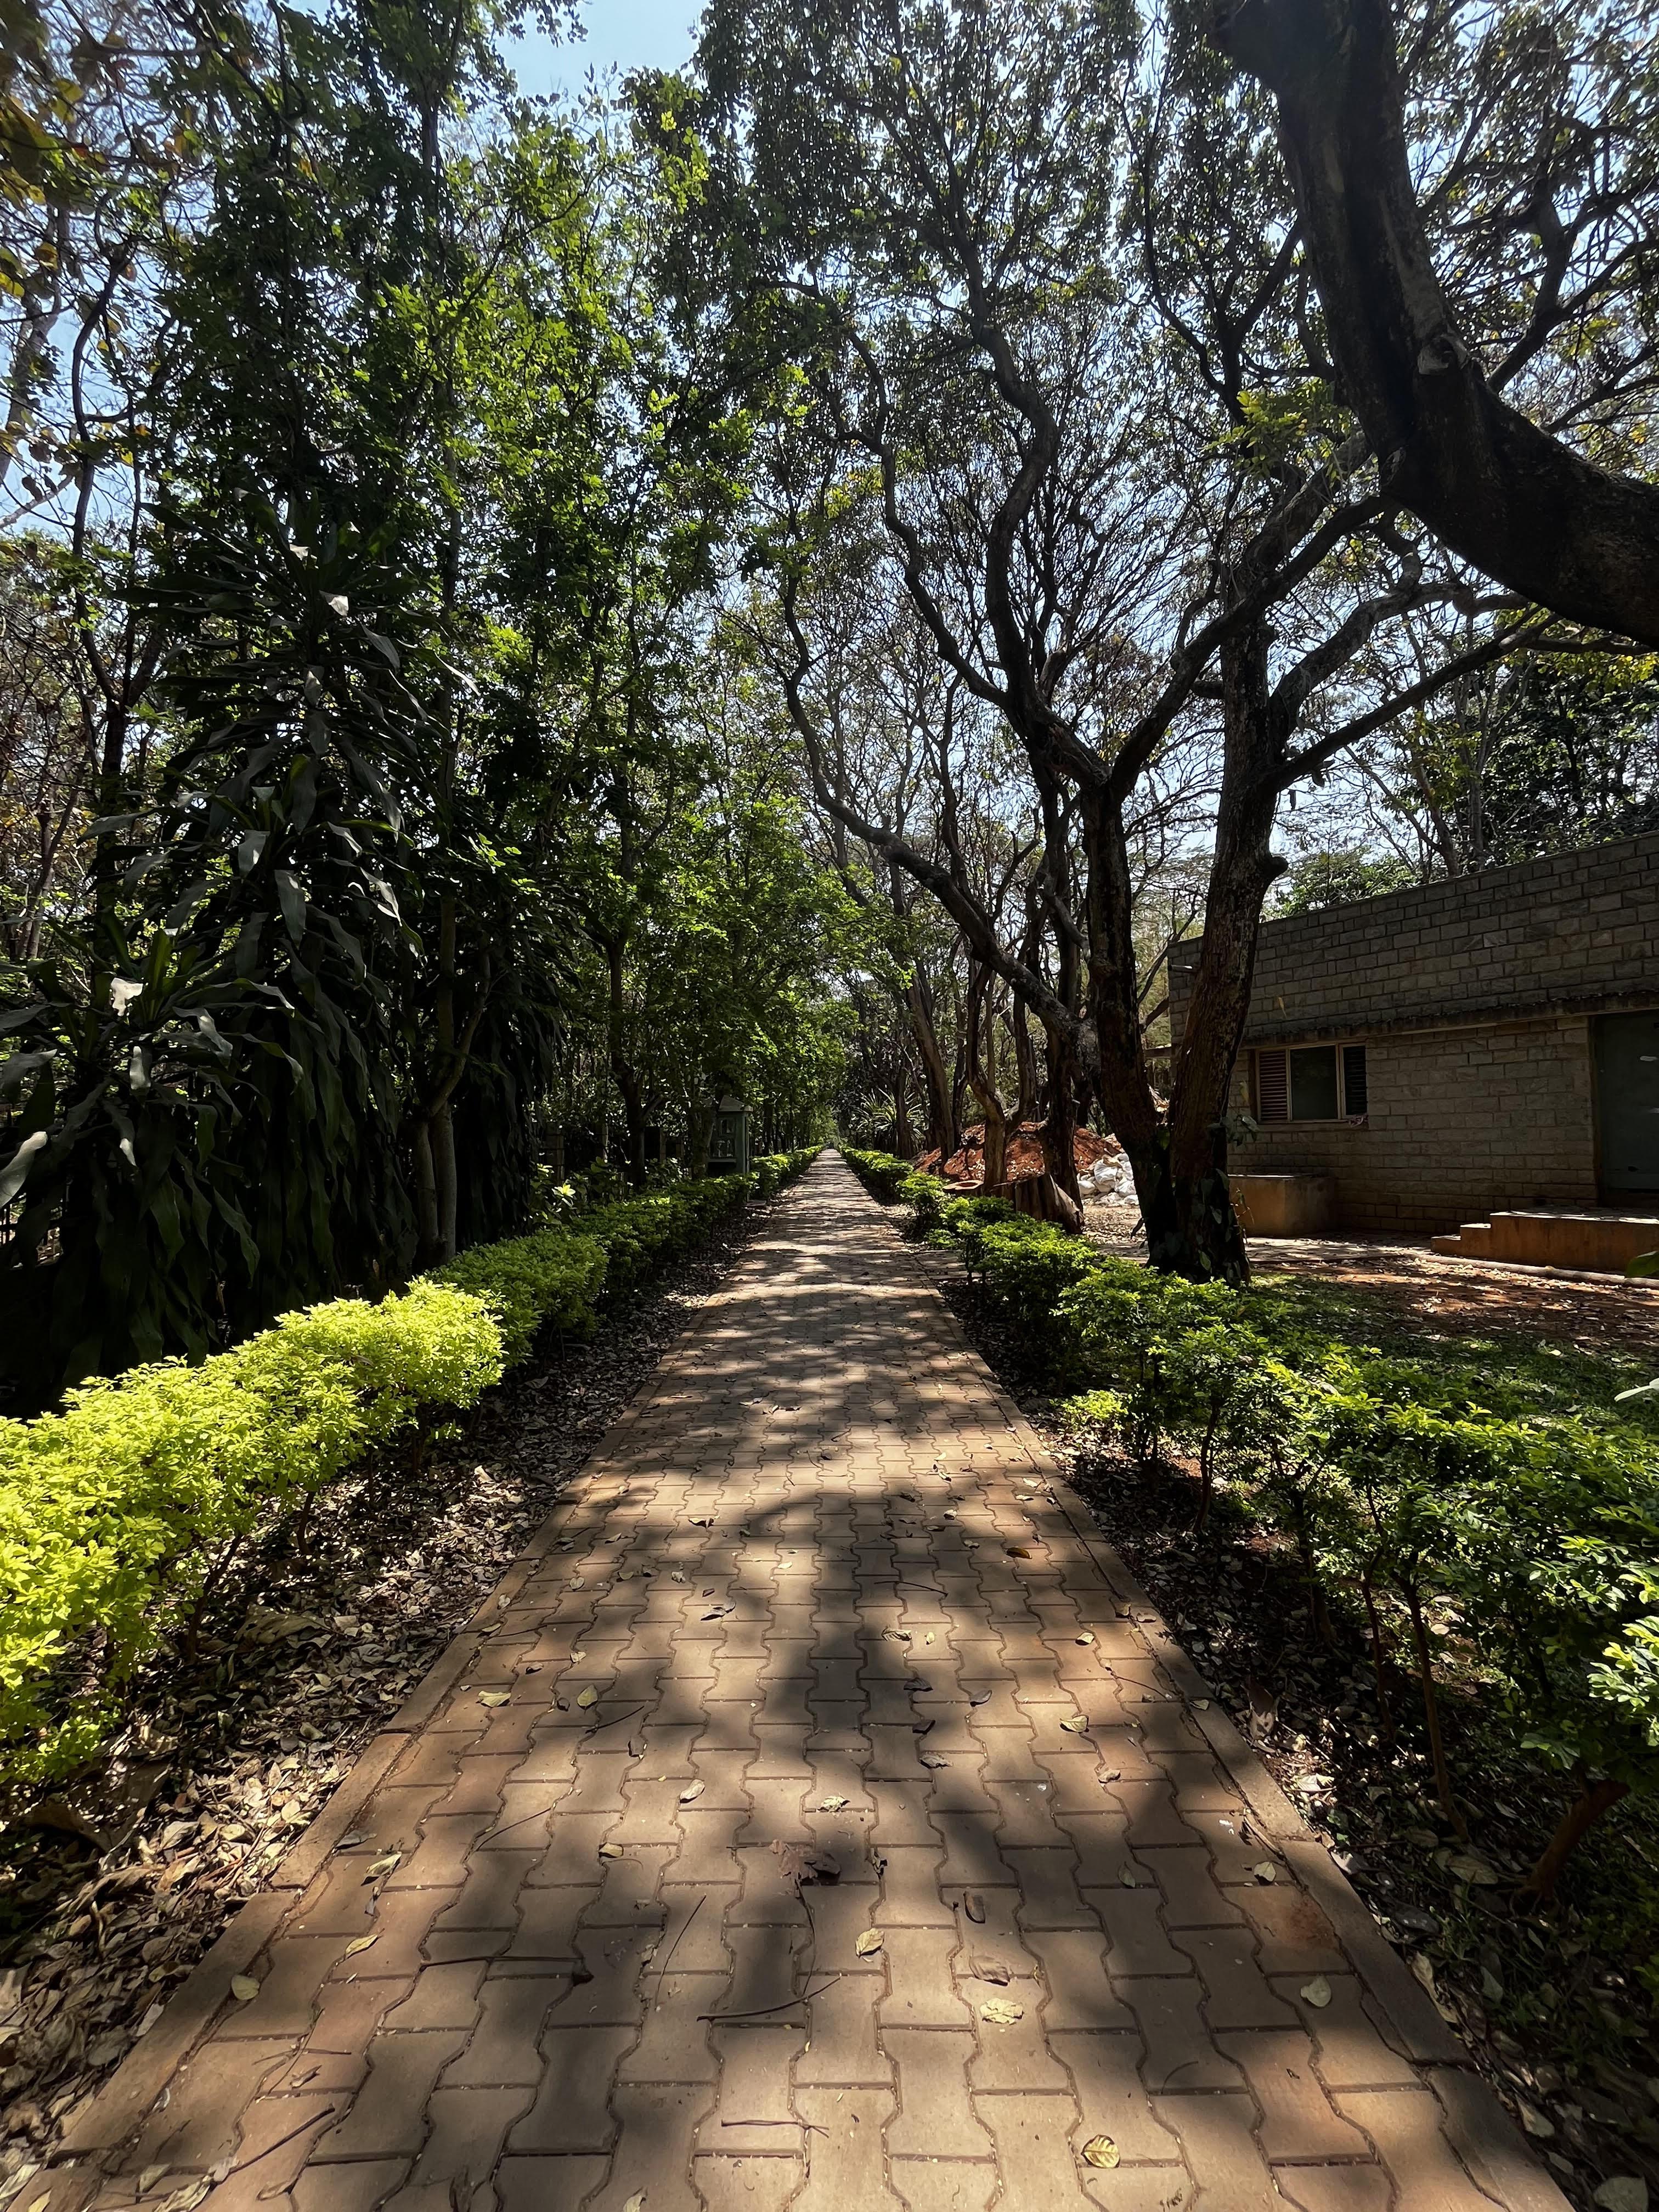 Each morning, strolling through the NCBS campus felt like a serene communion with nature. The daily journey to our workshop hub along these picturesque roads was a highlight of our day! Photo credit: Mahima Samraik Each morning, strolling through the NCBS campus felt like a serene communion with nature. The daily journey to our workshop hub along these picturesque roads was a highlight of our day! Photo credit: Mahima Samraik